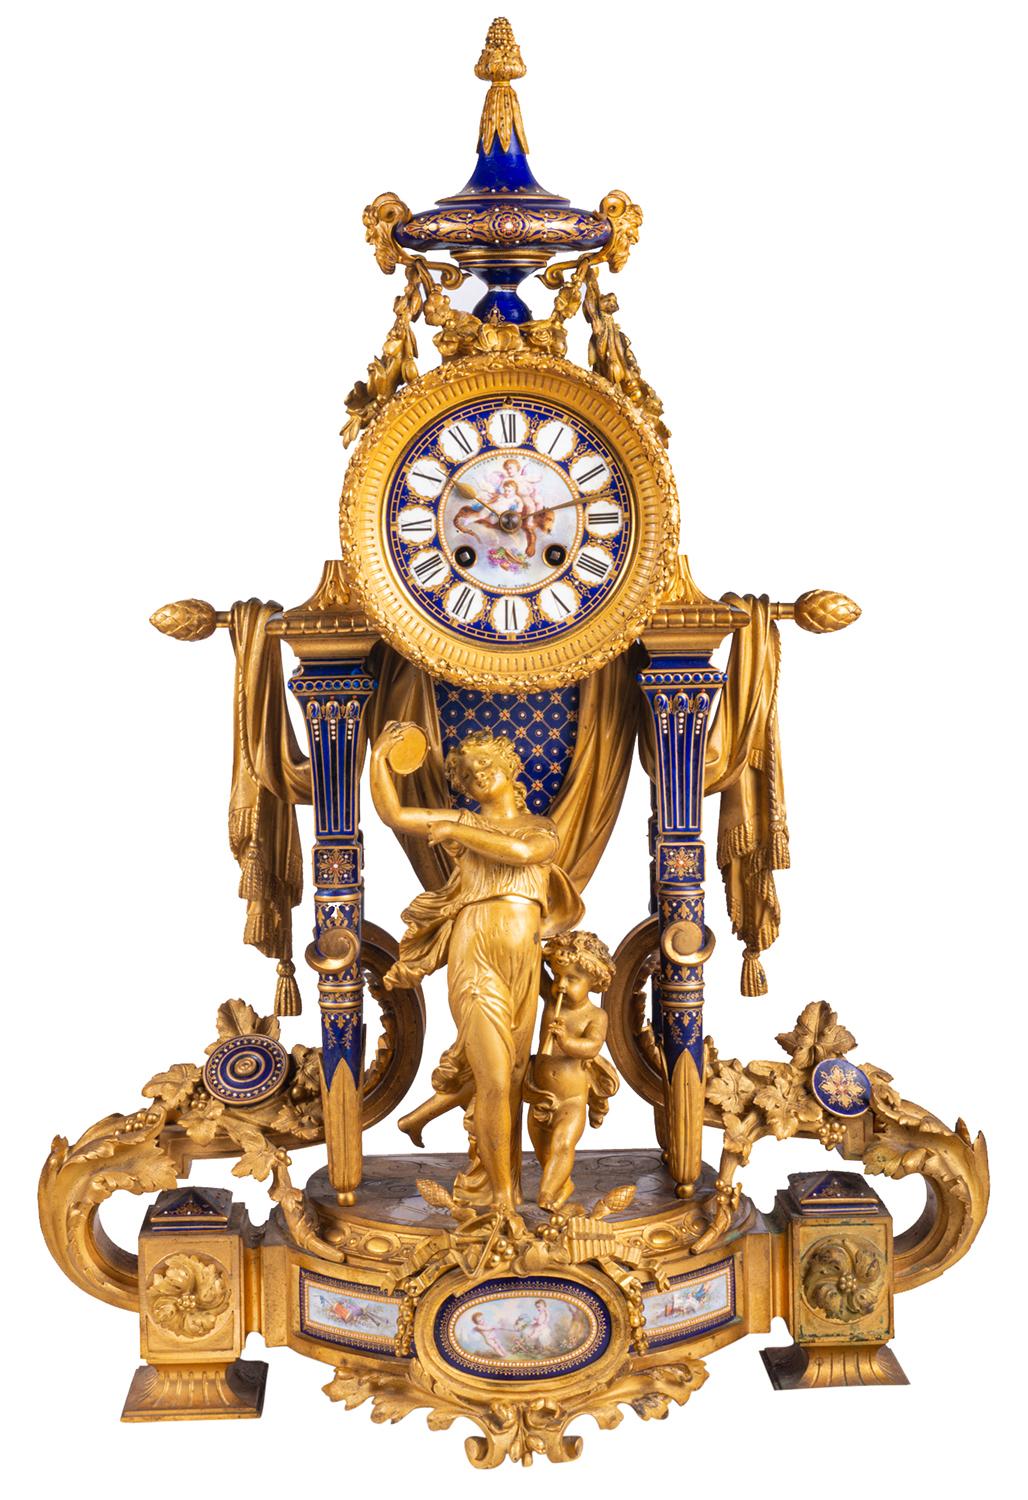 A very fine quality French late 19th century Sevres style and gilded ormolu clock garniture. Having a pair of four branch candelabra, each with ram's head and female mask mounts, drapes and inset Sevres style porcelain plaques with classical hand